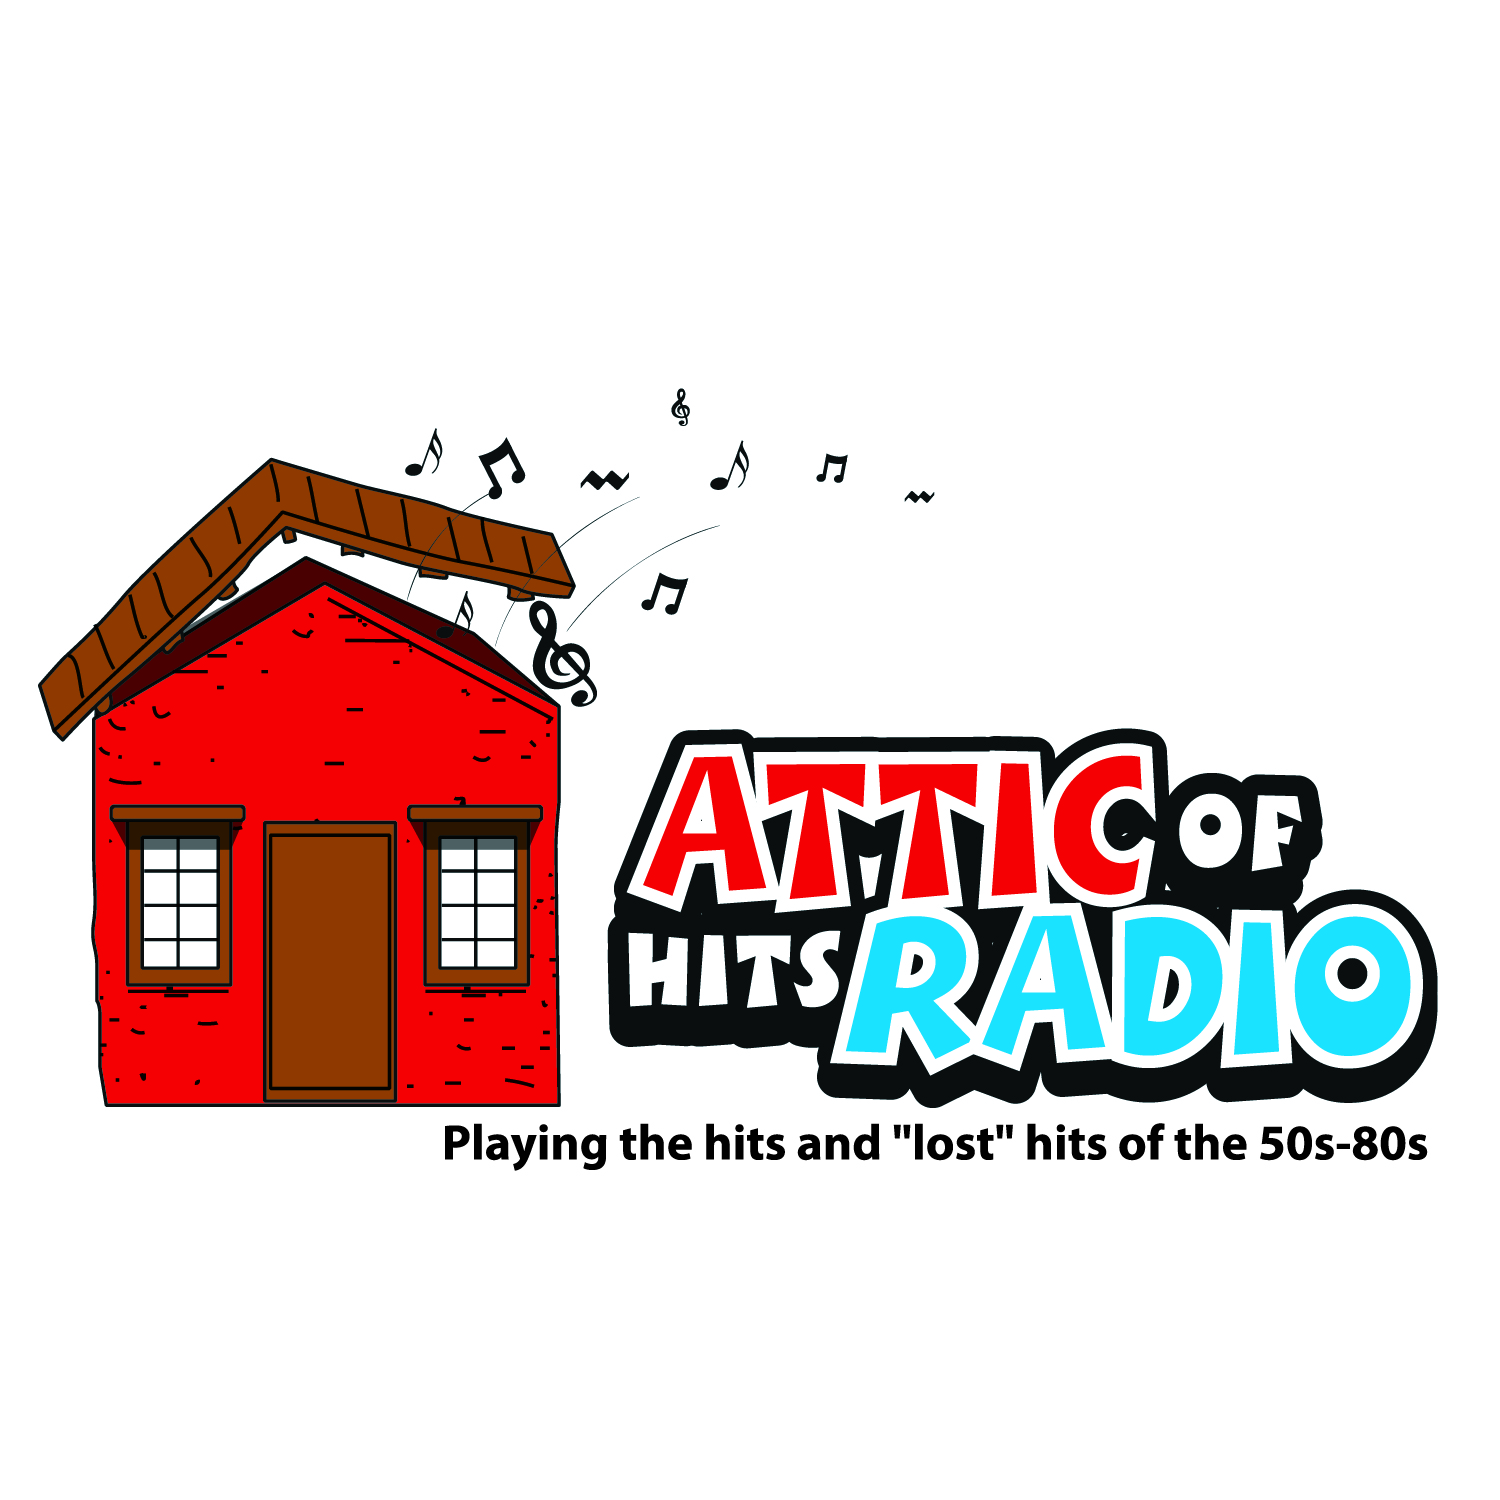 Art for Best Station On the Internet by Jingle